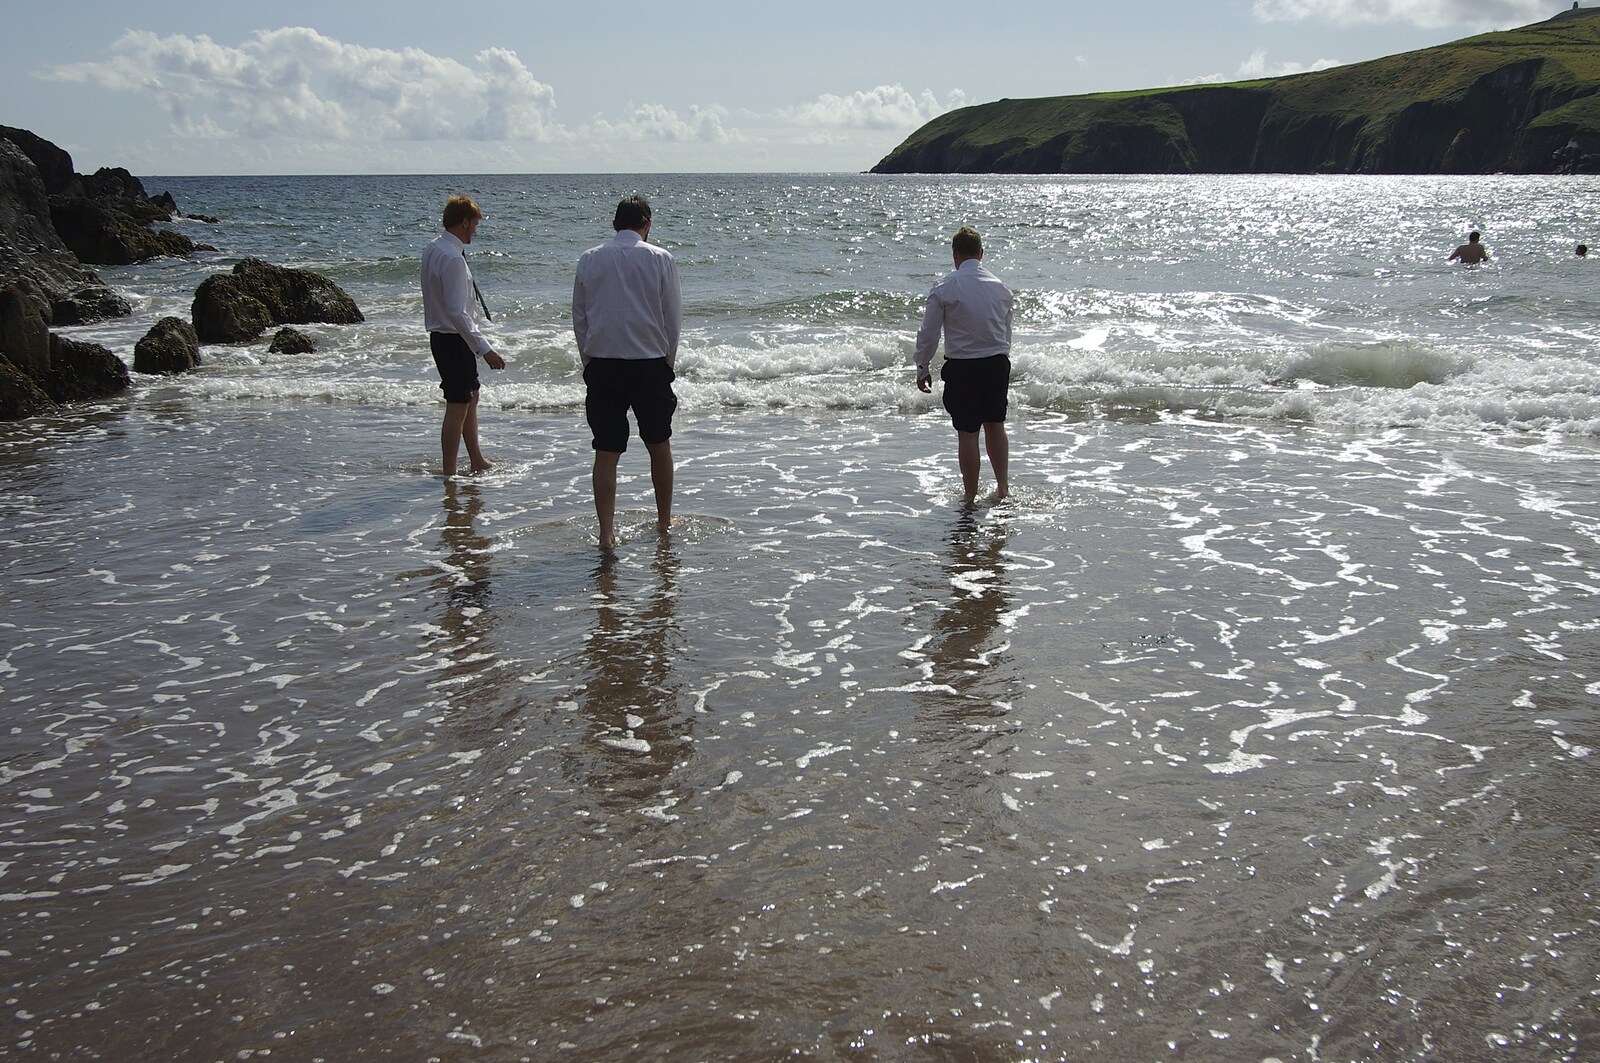 The lads go for a paddle from Julie and Cameron's Wedding, Ballintaggart House, Dingle - 24th July 2009